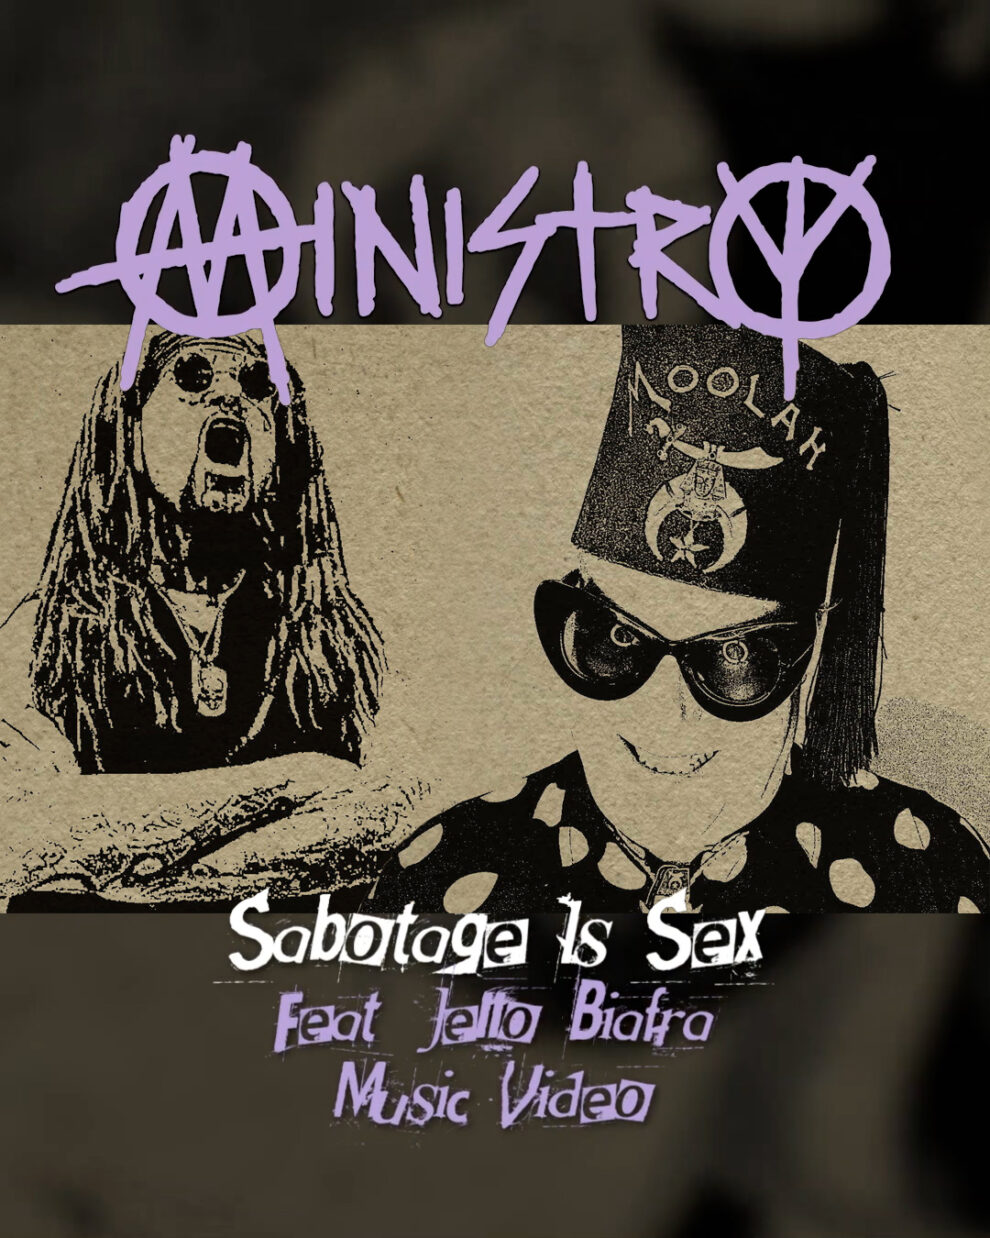 Watch New Ministry Video For "Sabotage Is Sex" Featuring Jello Biafra